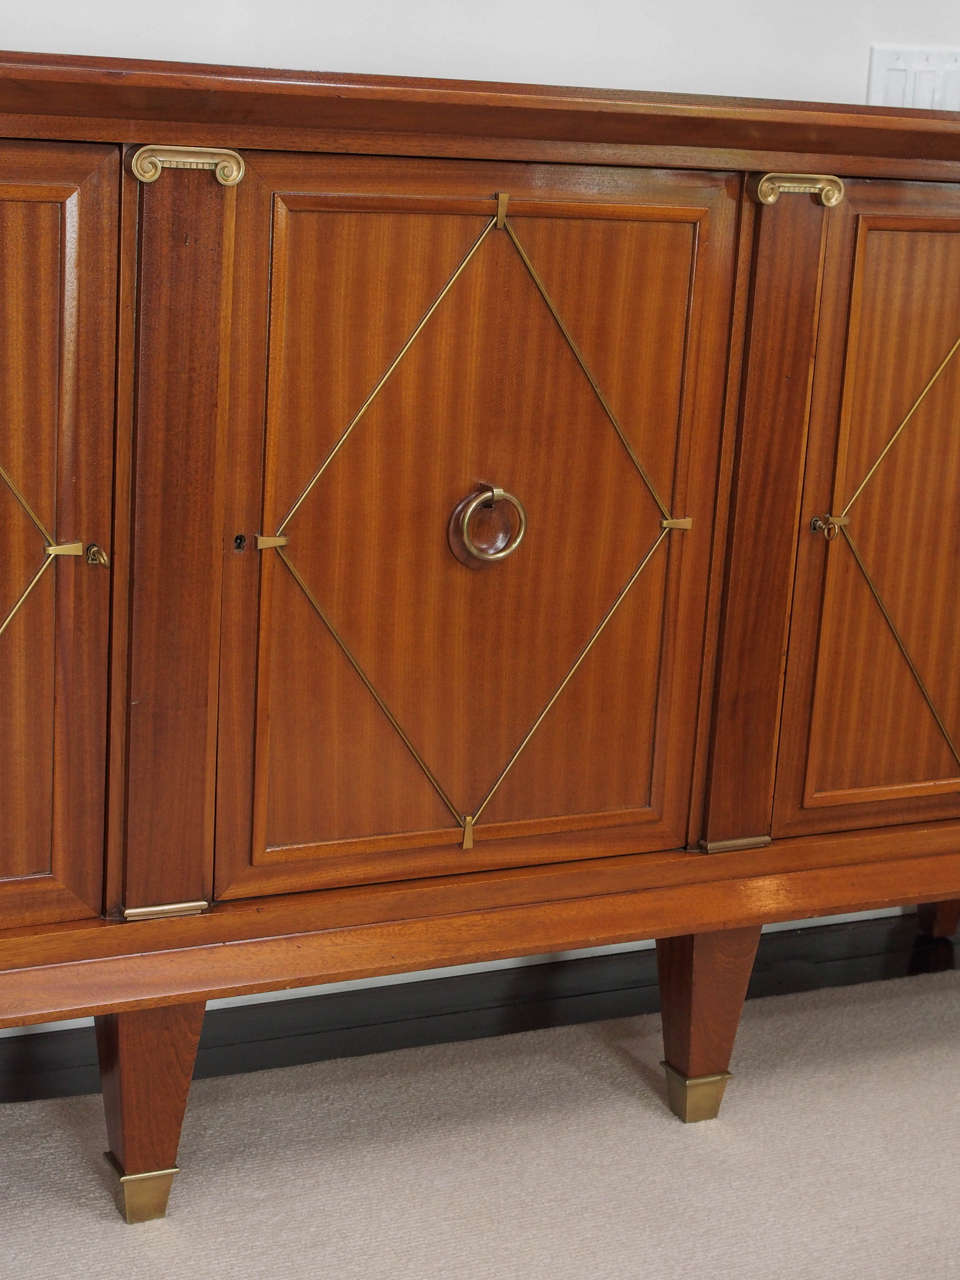 Mid-20th Century French Mahogany Sideboard in the Directoire Taste, circa 1940s